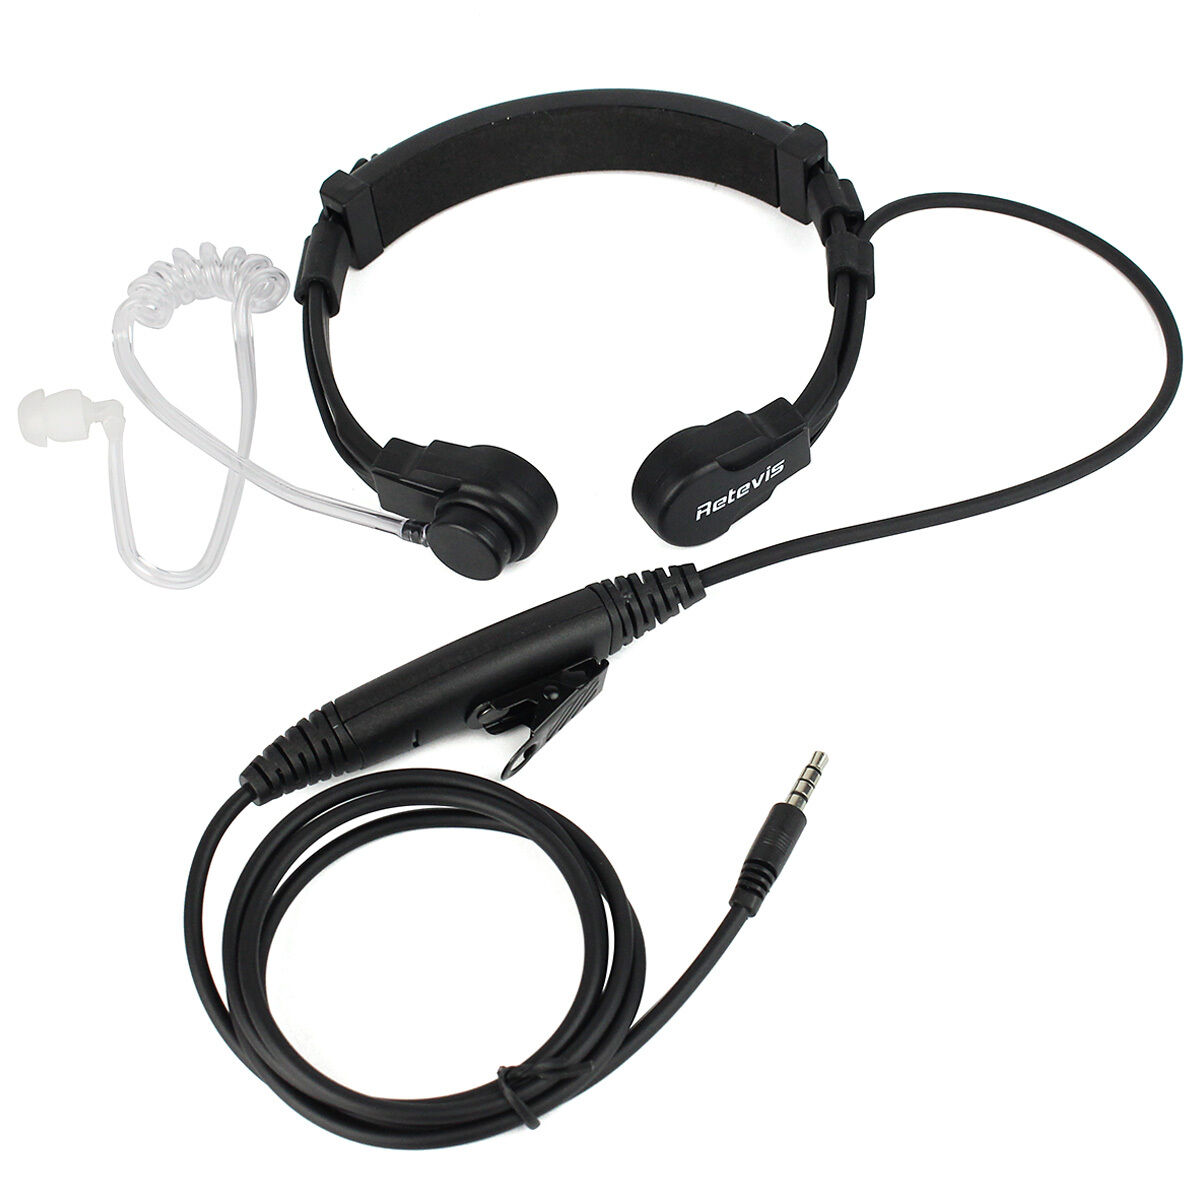 Retractable Throat MIC Covert Acoustic Tube Earpiece Cellphone 1Pin 3.5mm